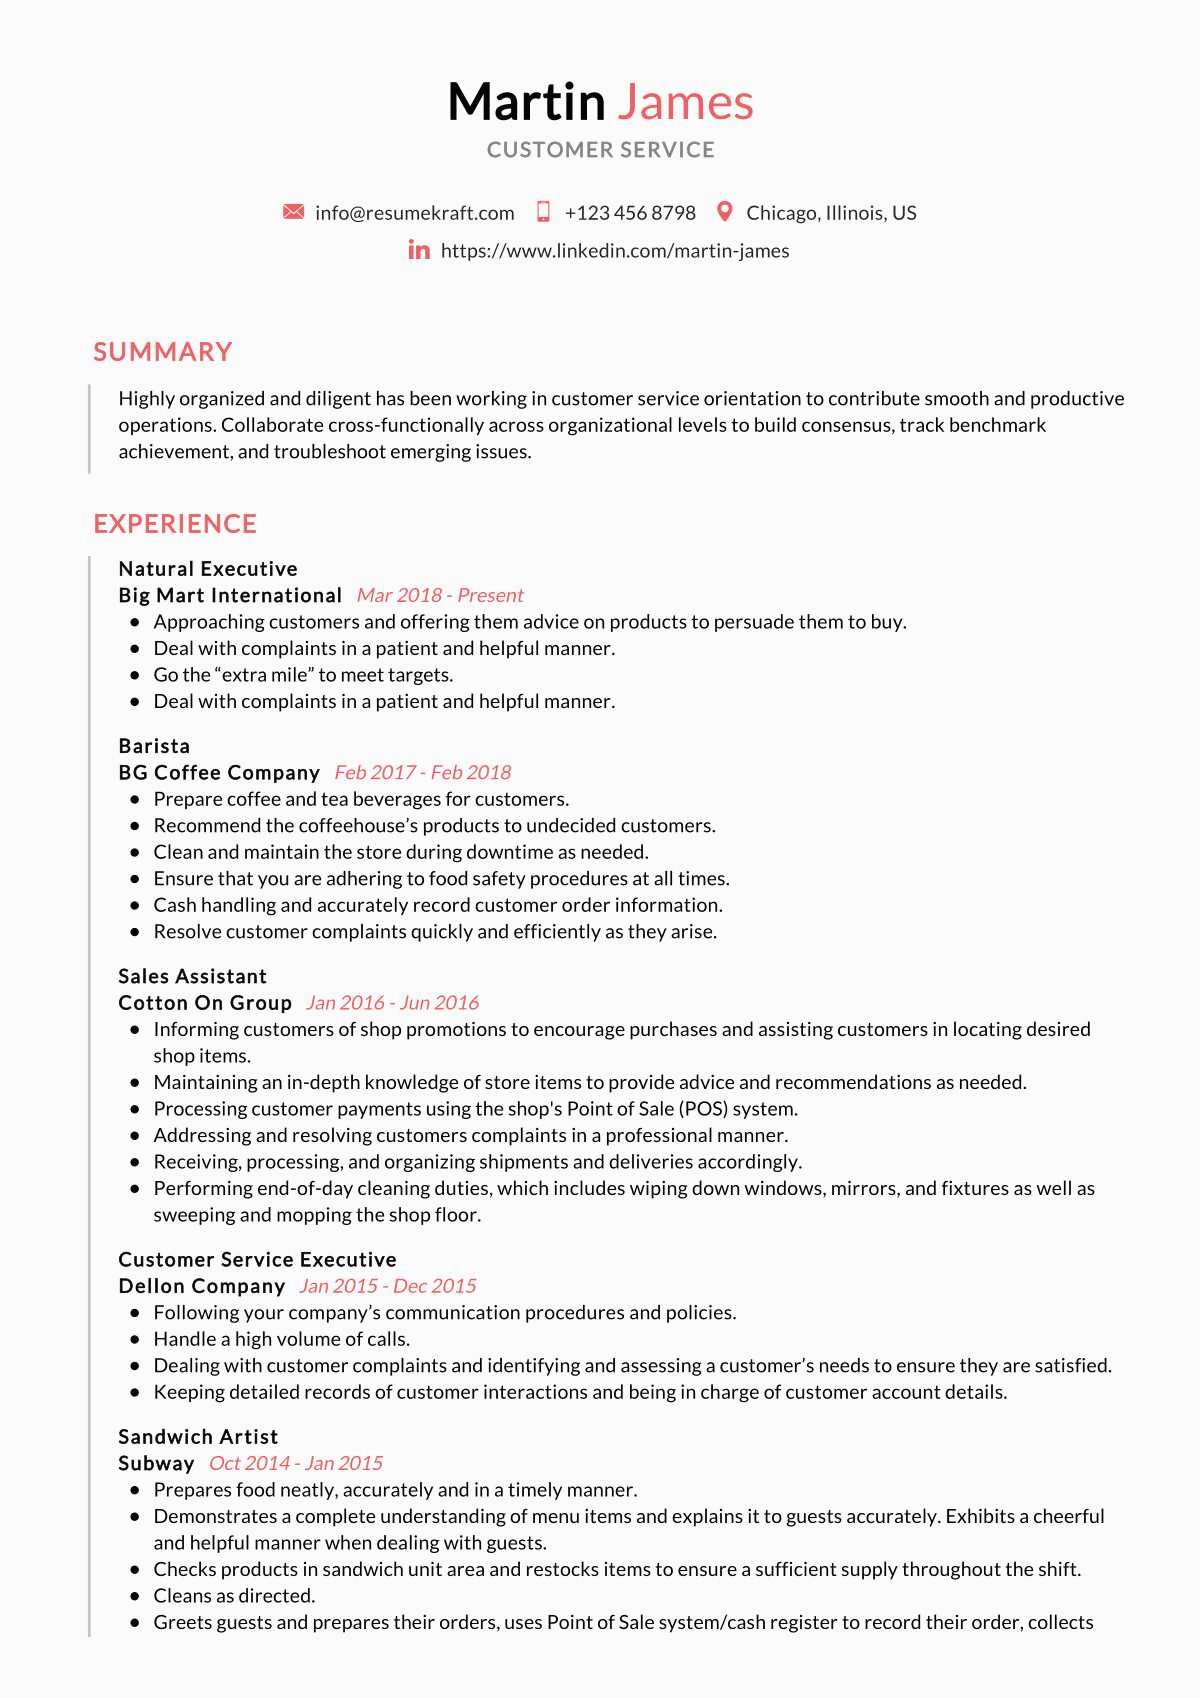 Sample Resumes for Jobs In Customer Service Customer Service Resume Example 2022